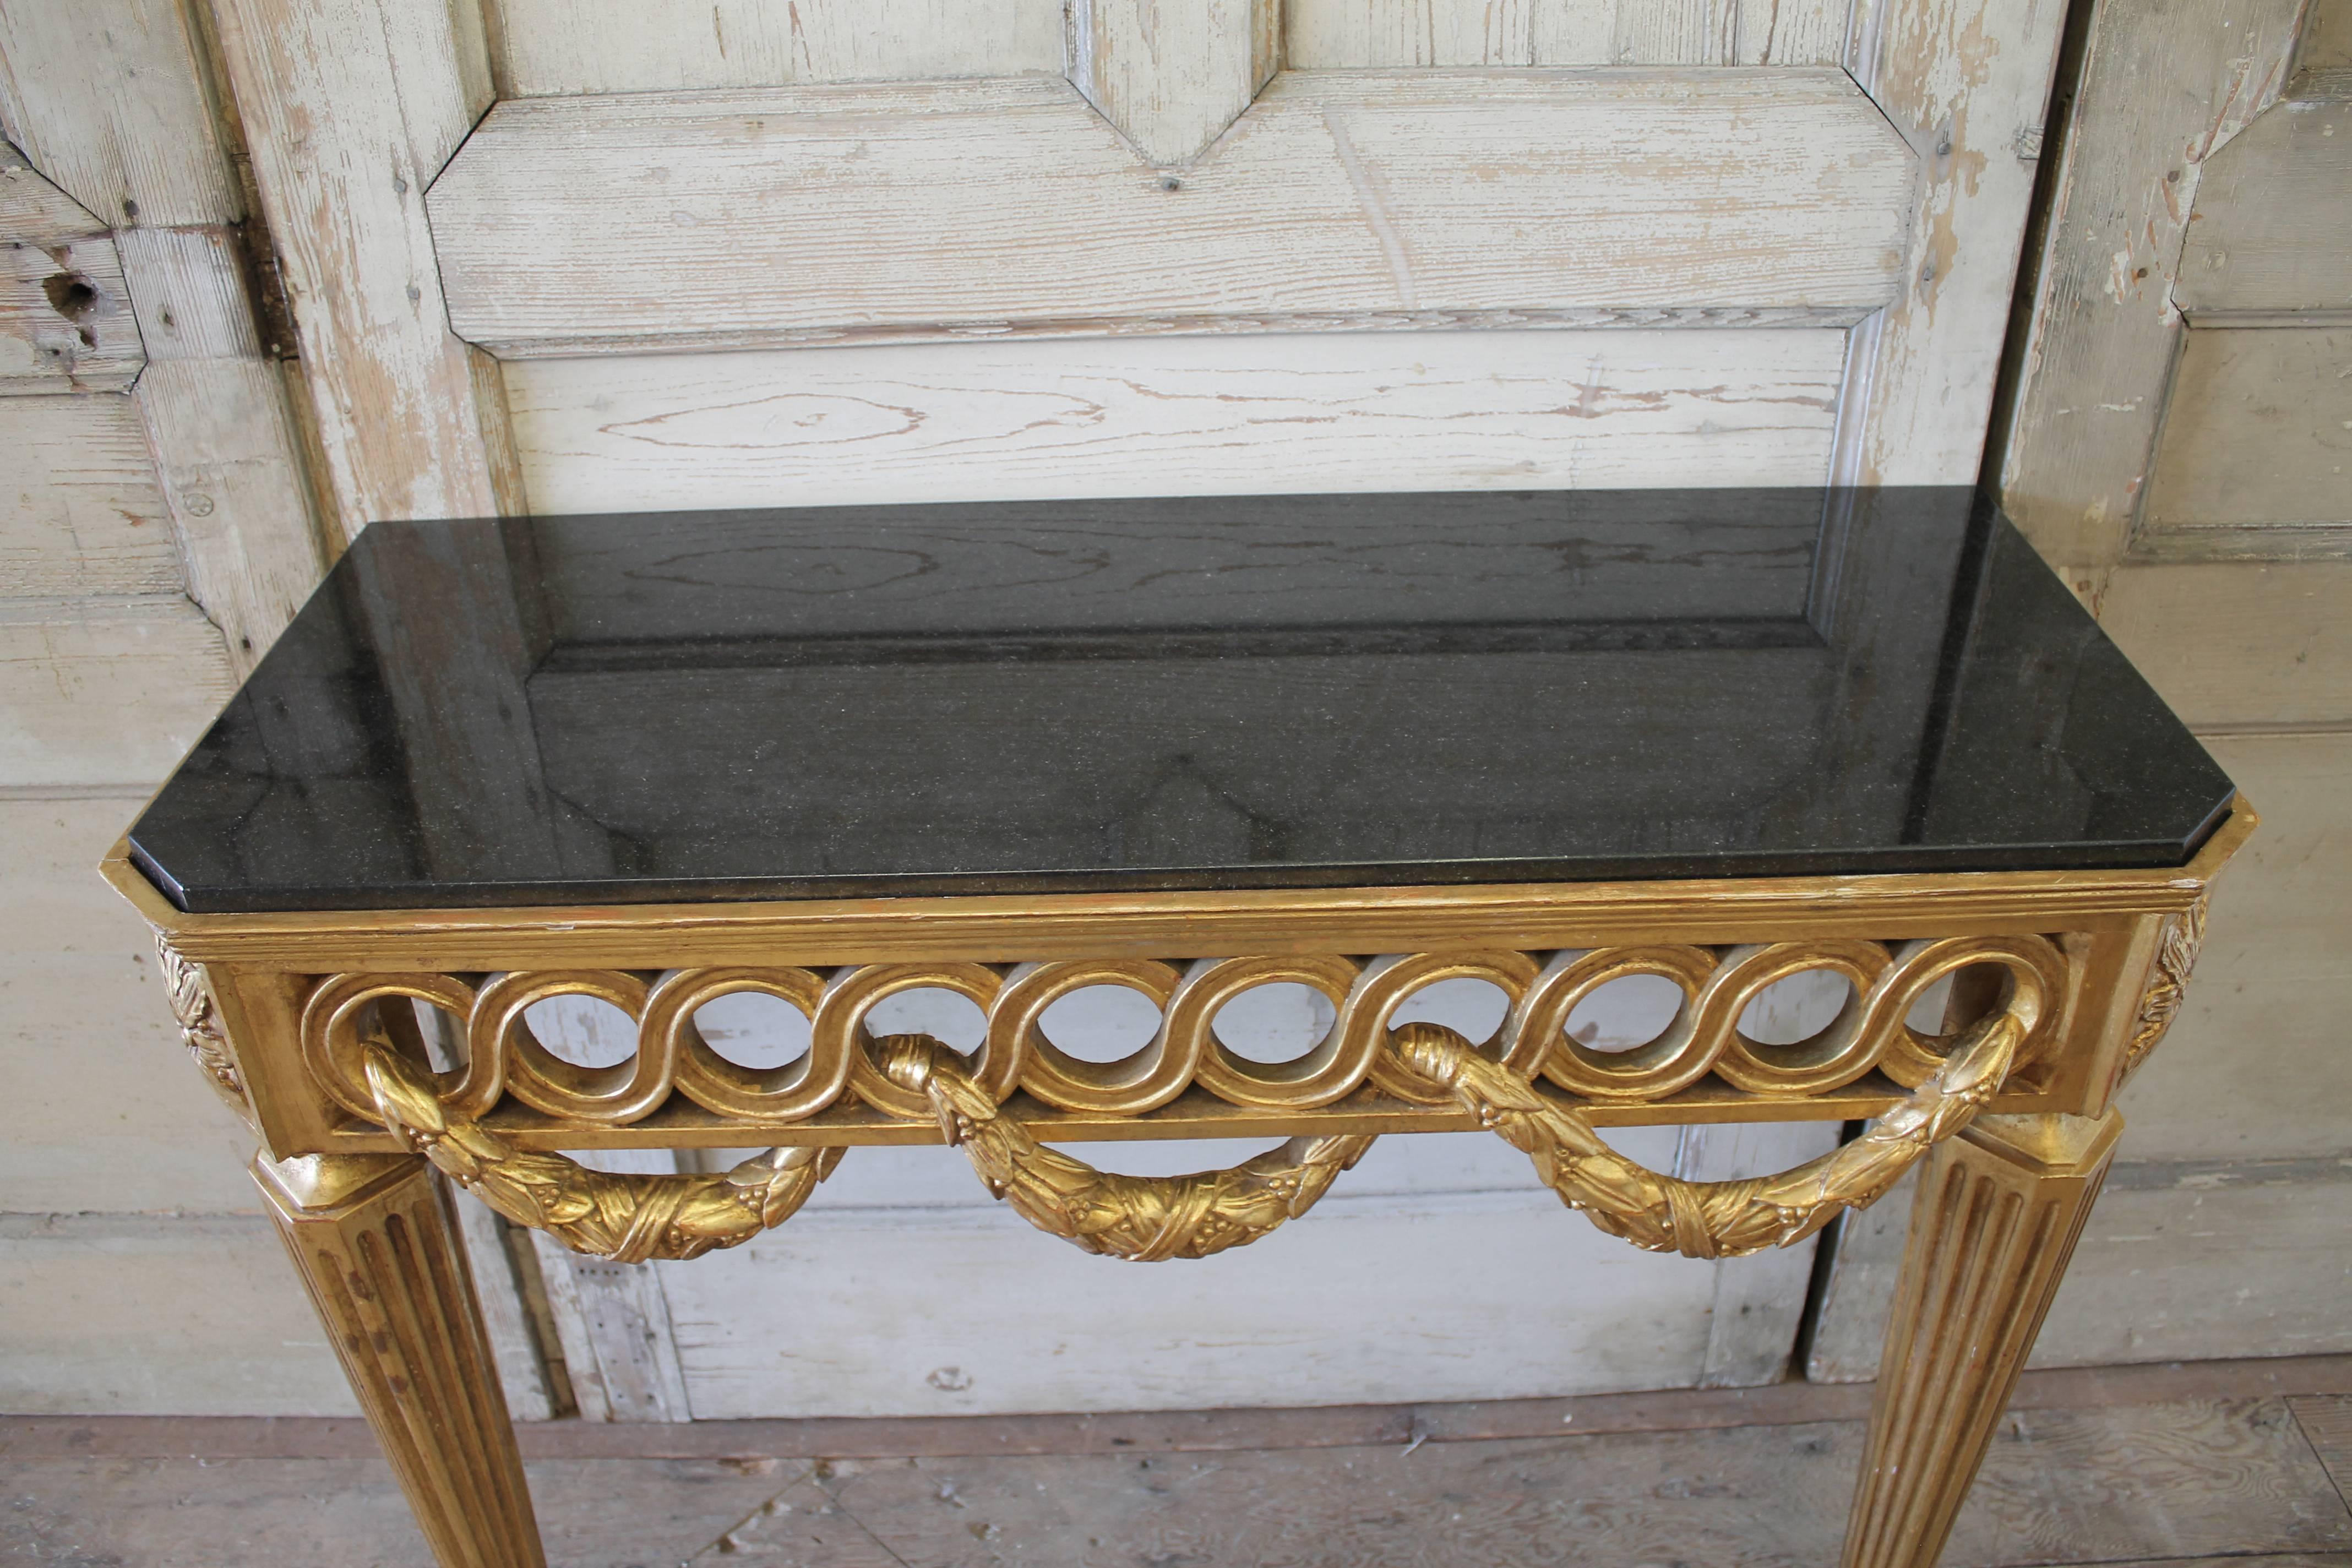 Beautiful neoclassical style wall console, with large laurel leaf swags roping through the front and sides.
Two Legs at the front corners, this console attaches to a wall easily with predrilled areas along the back.
The black marble inset is not